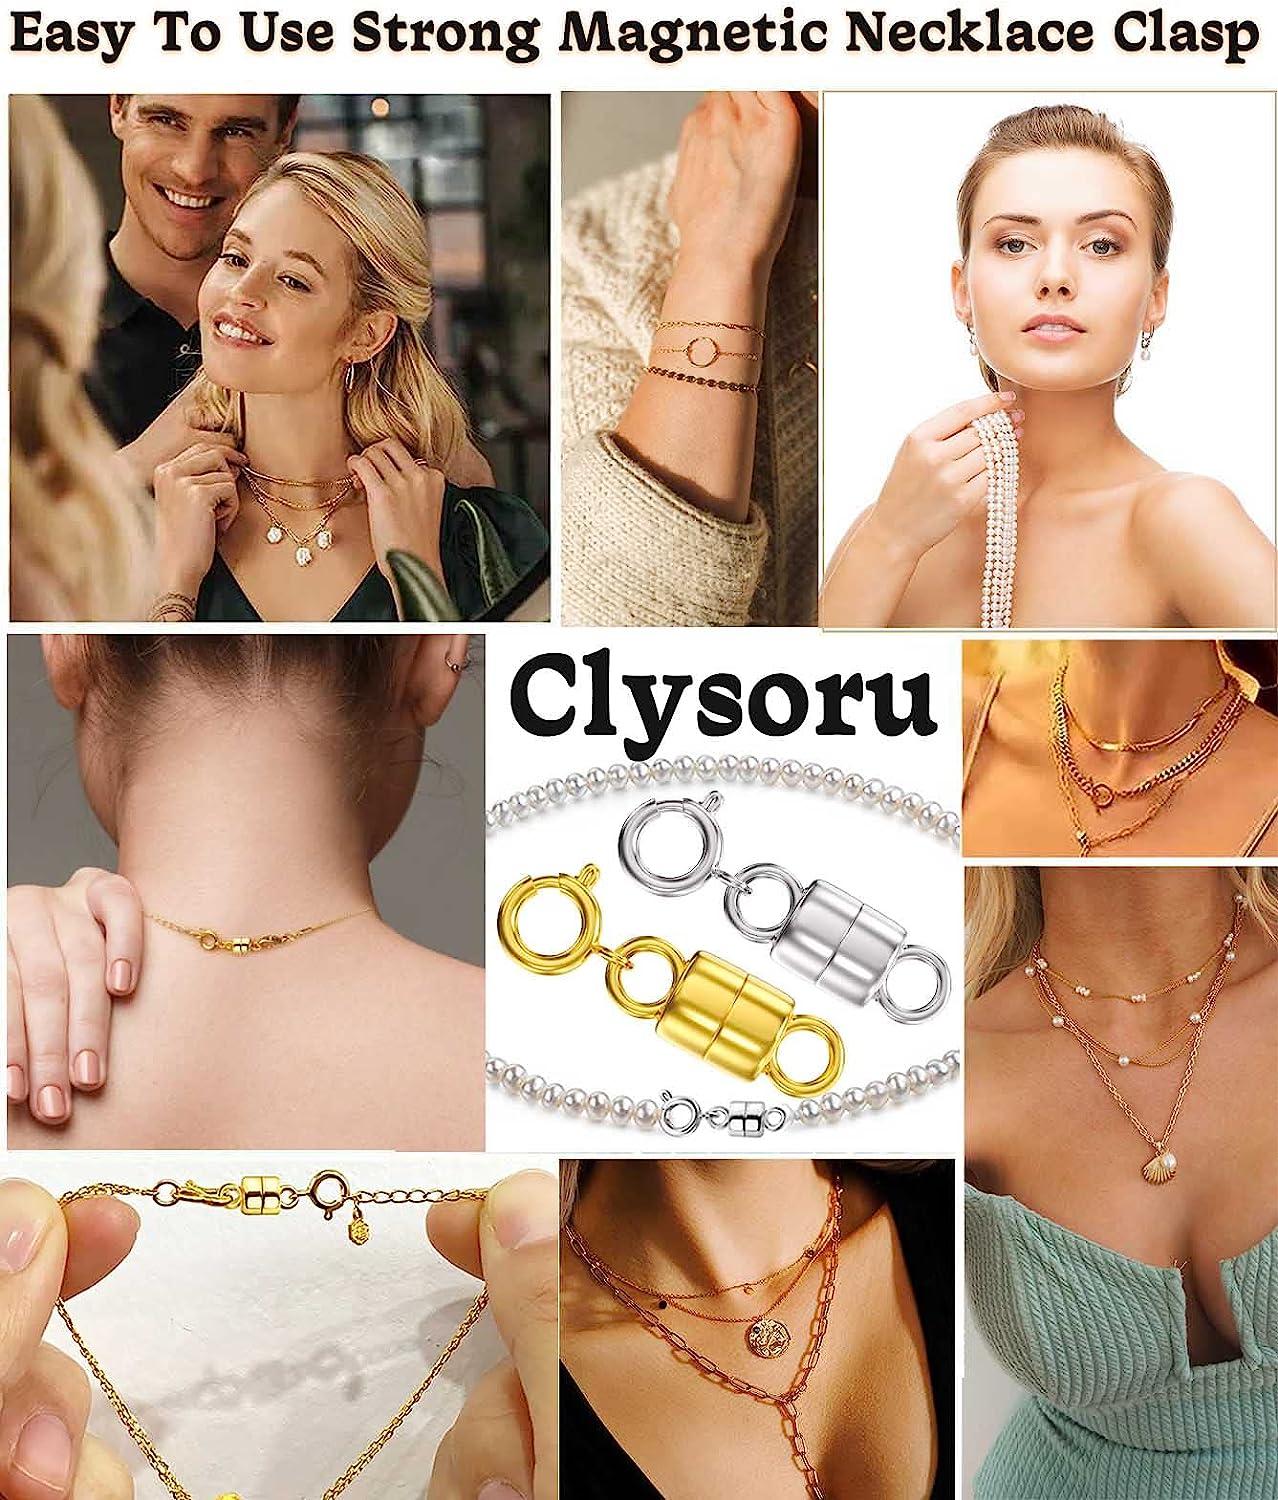 Clysoru Magnetic Necklace Clasps and Closures 14k Gold and Silver Beads Chain  Extender Necklaces Bracelet Safety Magnetic Locking Jewelry Clasp  Converter(4 Gold 4 Silver) 8pcs - 4 gold and 4 silver